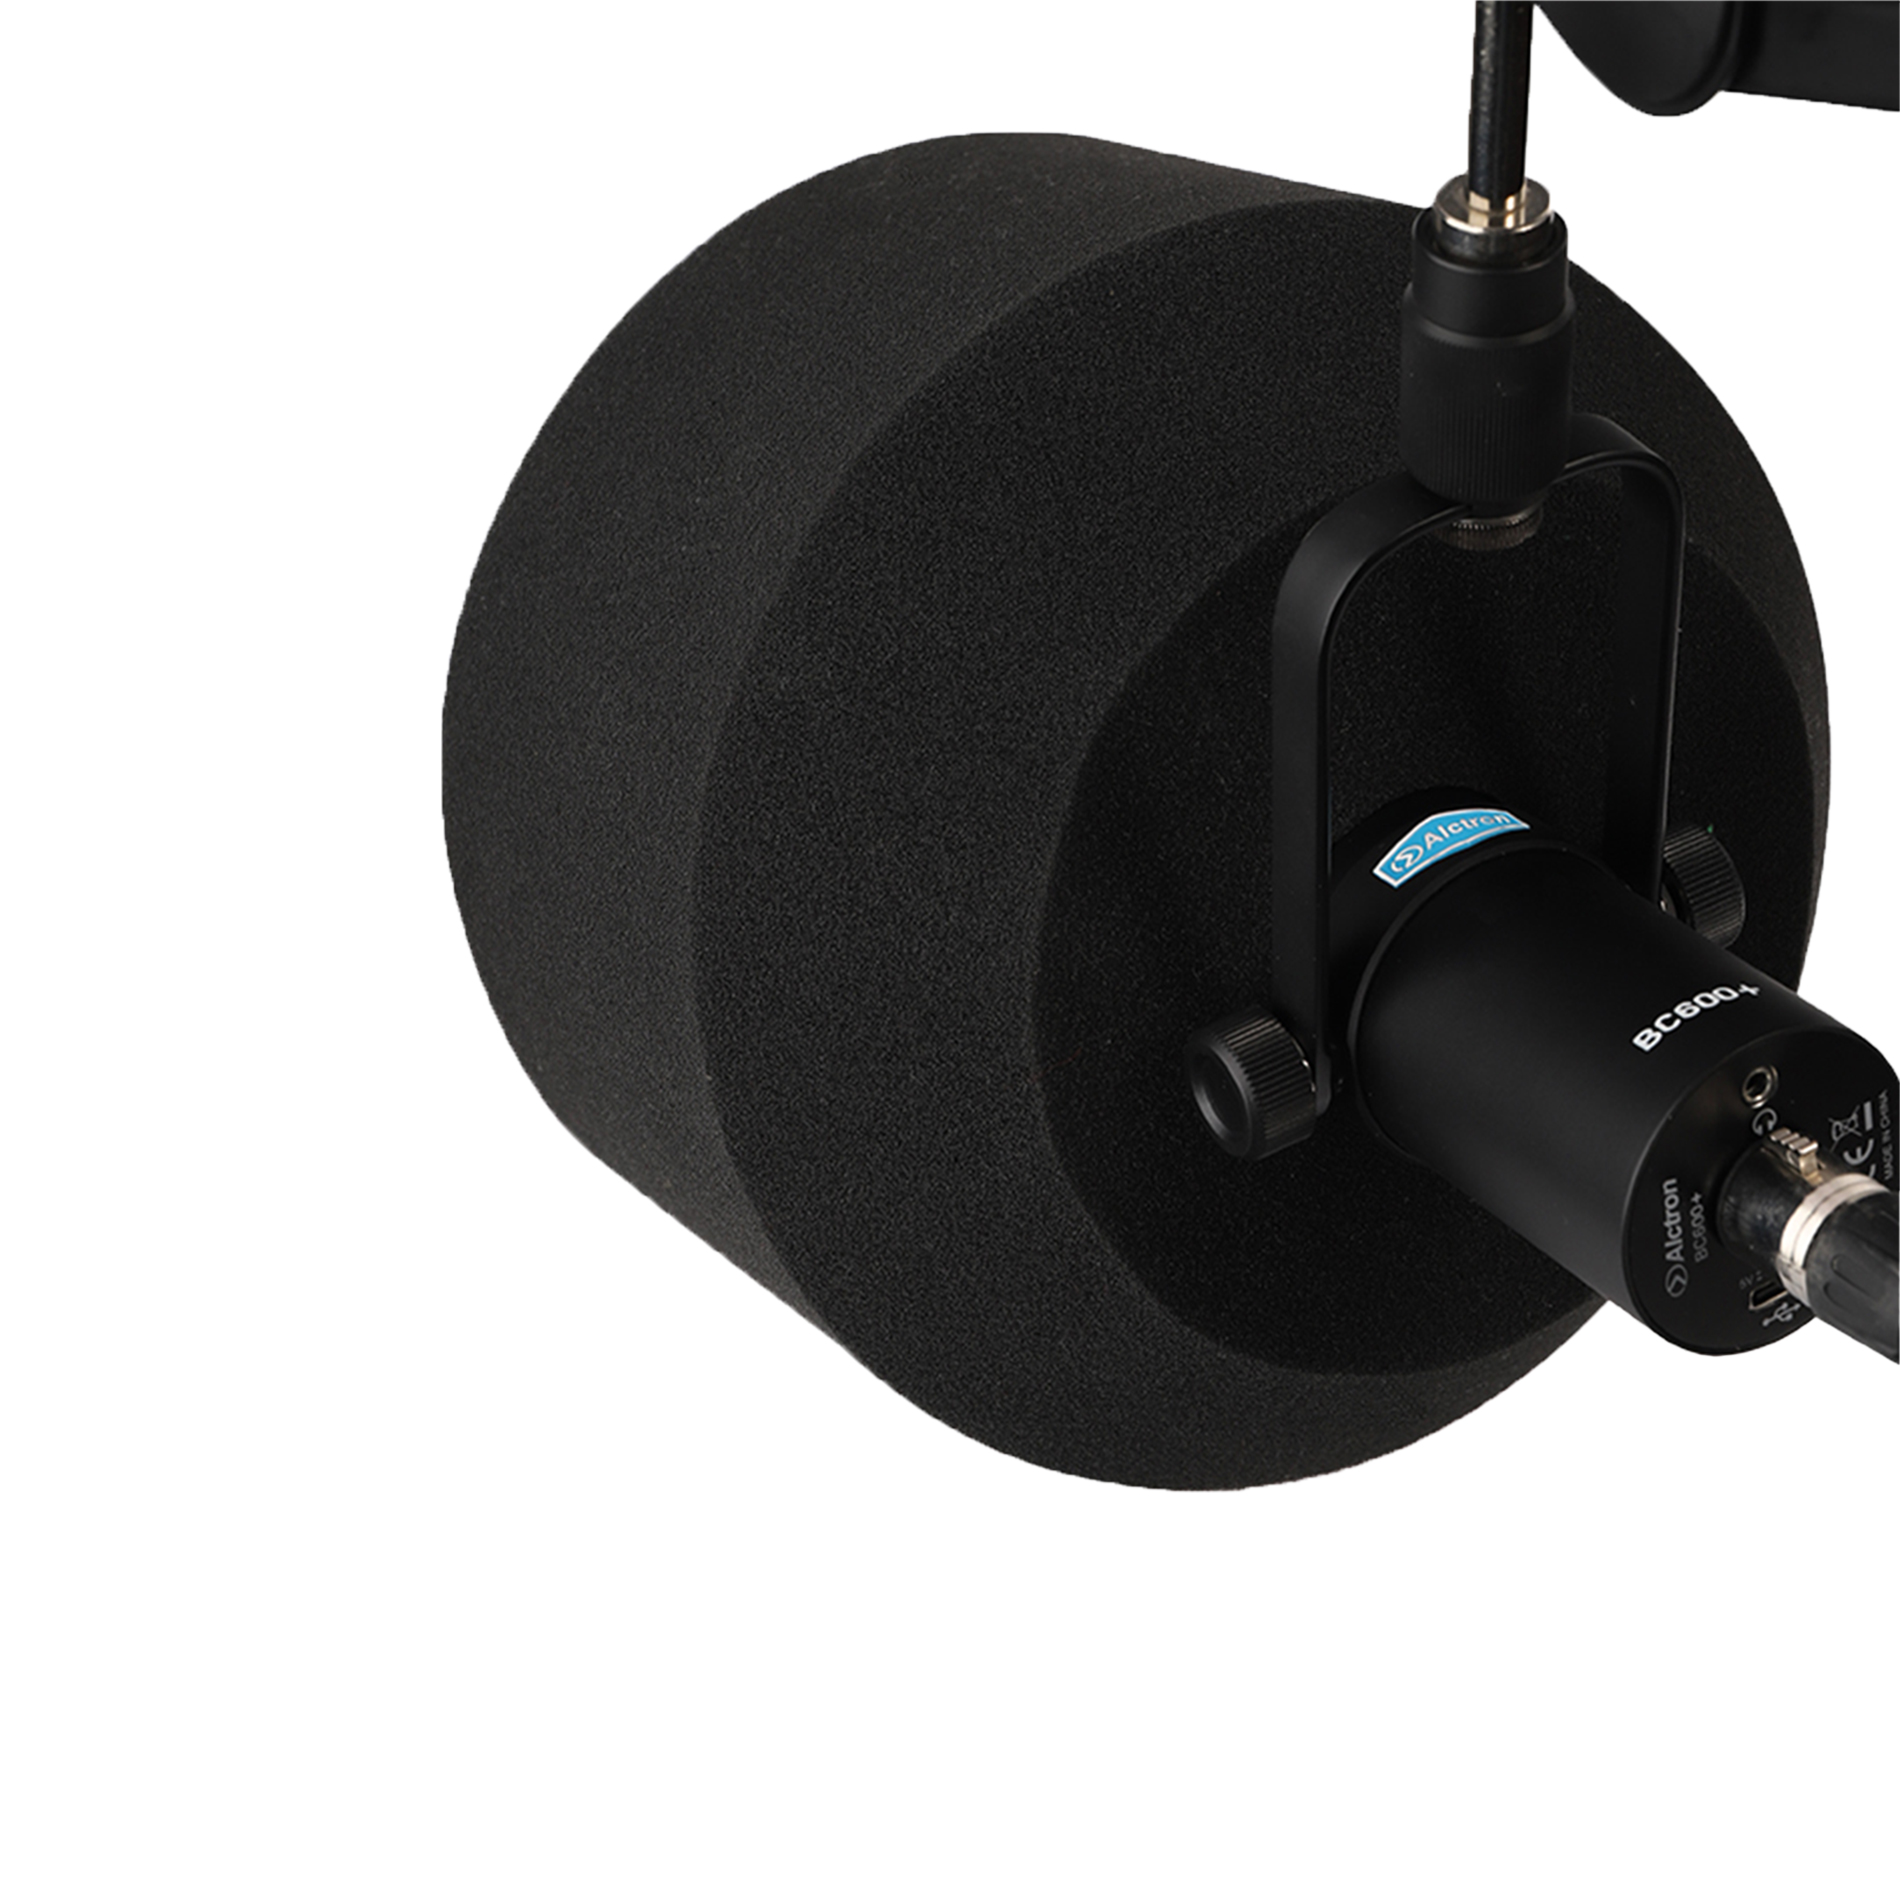 Alctron Pf 7 - Pop filter & microphone screen - Variation 3